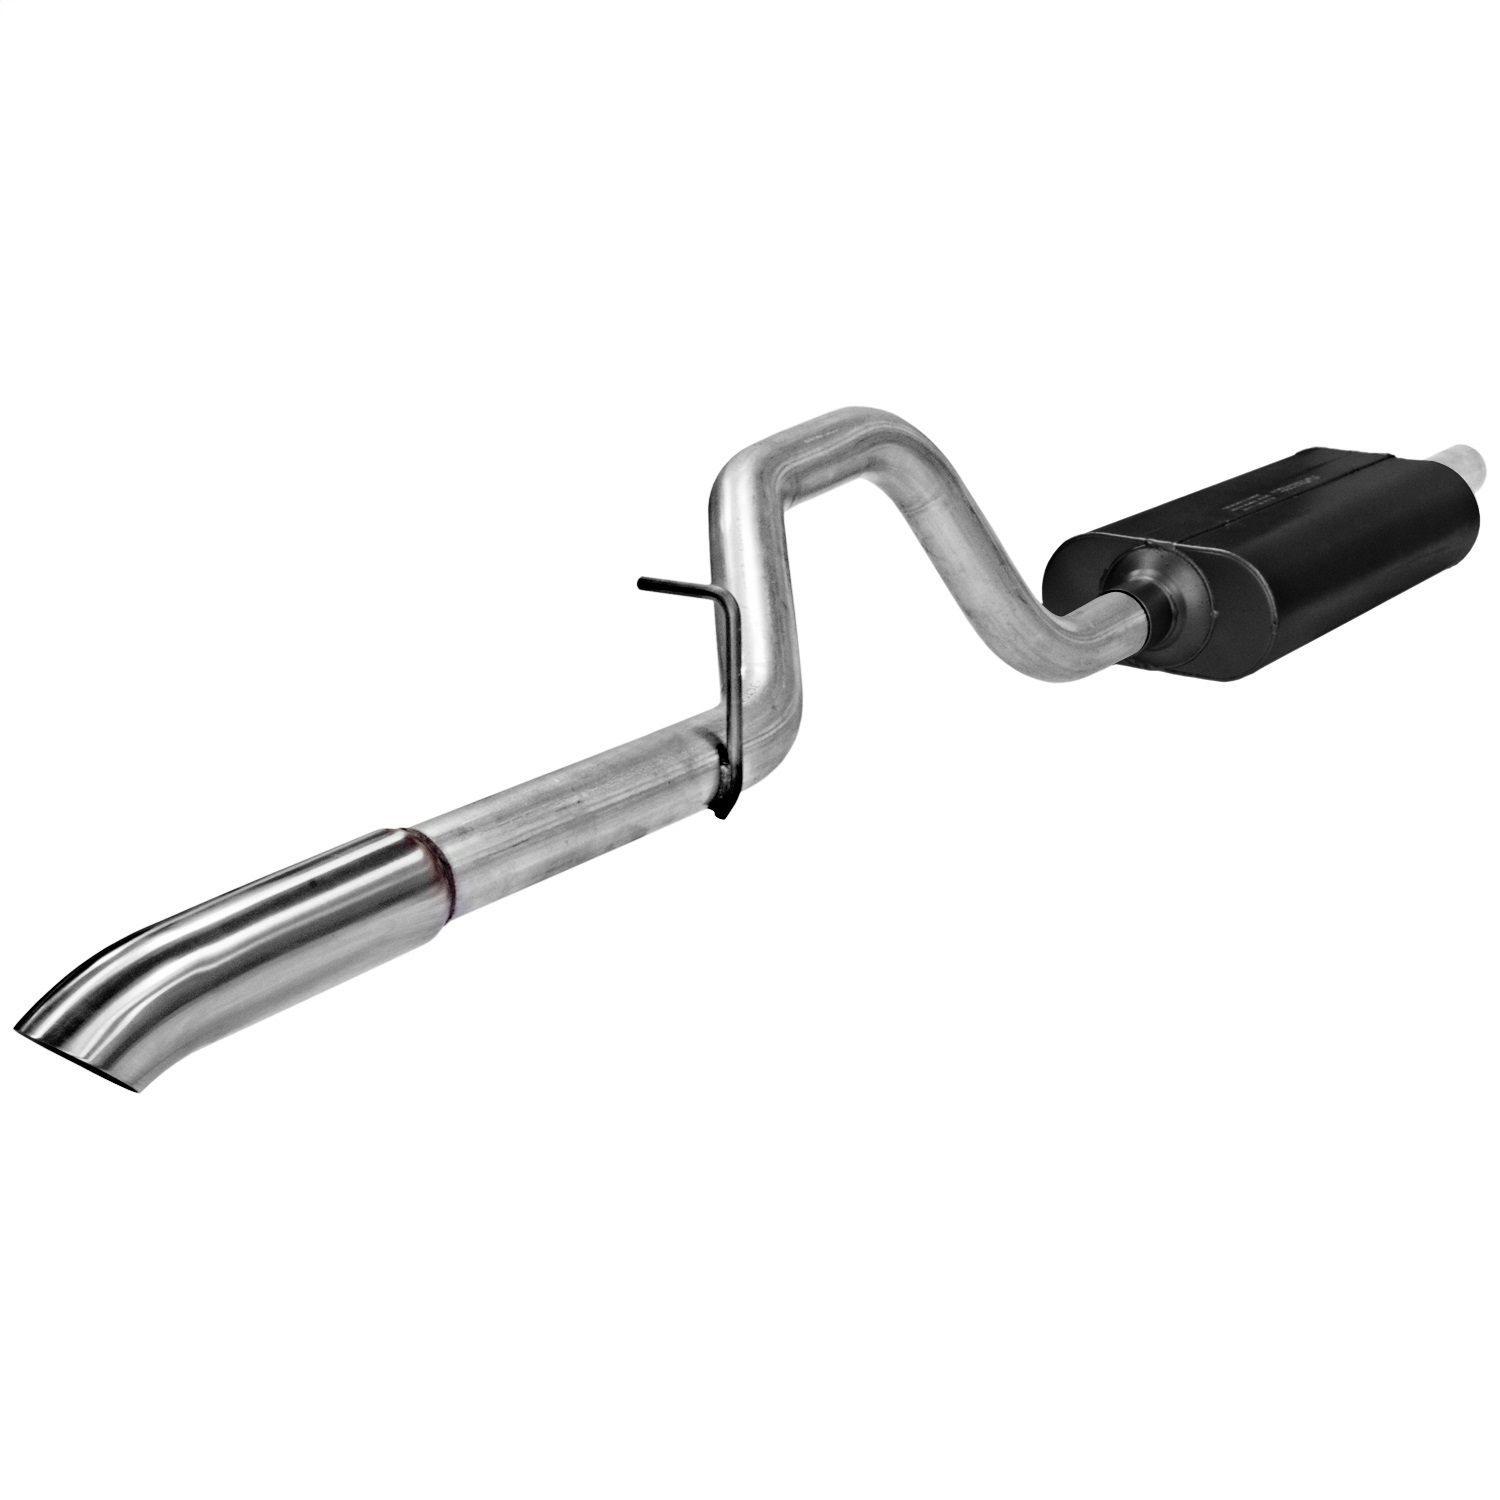 Flowmaster Flowmaster 17208 American Thunder Cat Back Exhaust System Fits 98-03 Durango